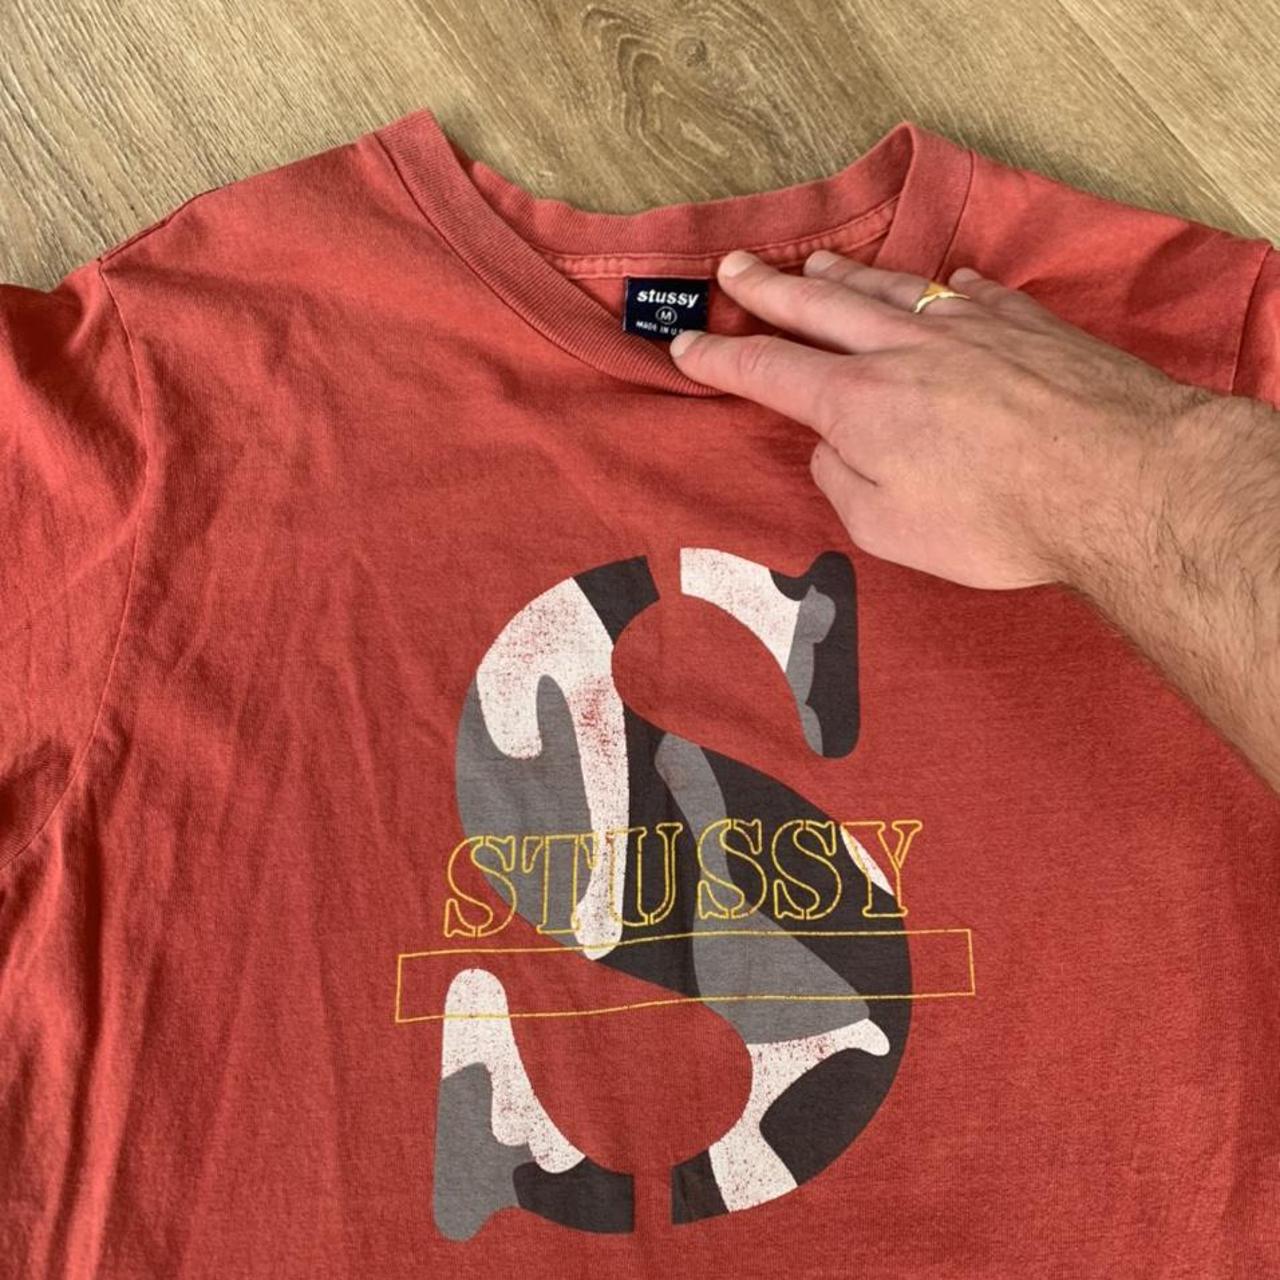 Stussy x Louis Vuitton T Shirt Vintage From The - Depop